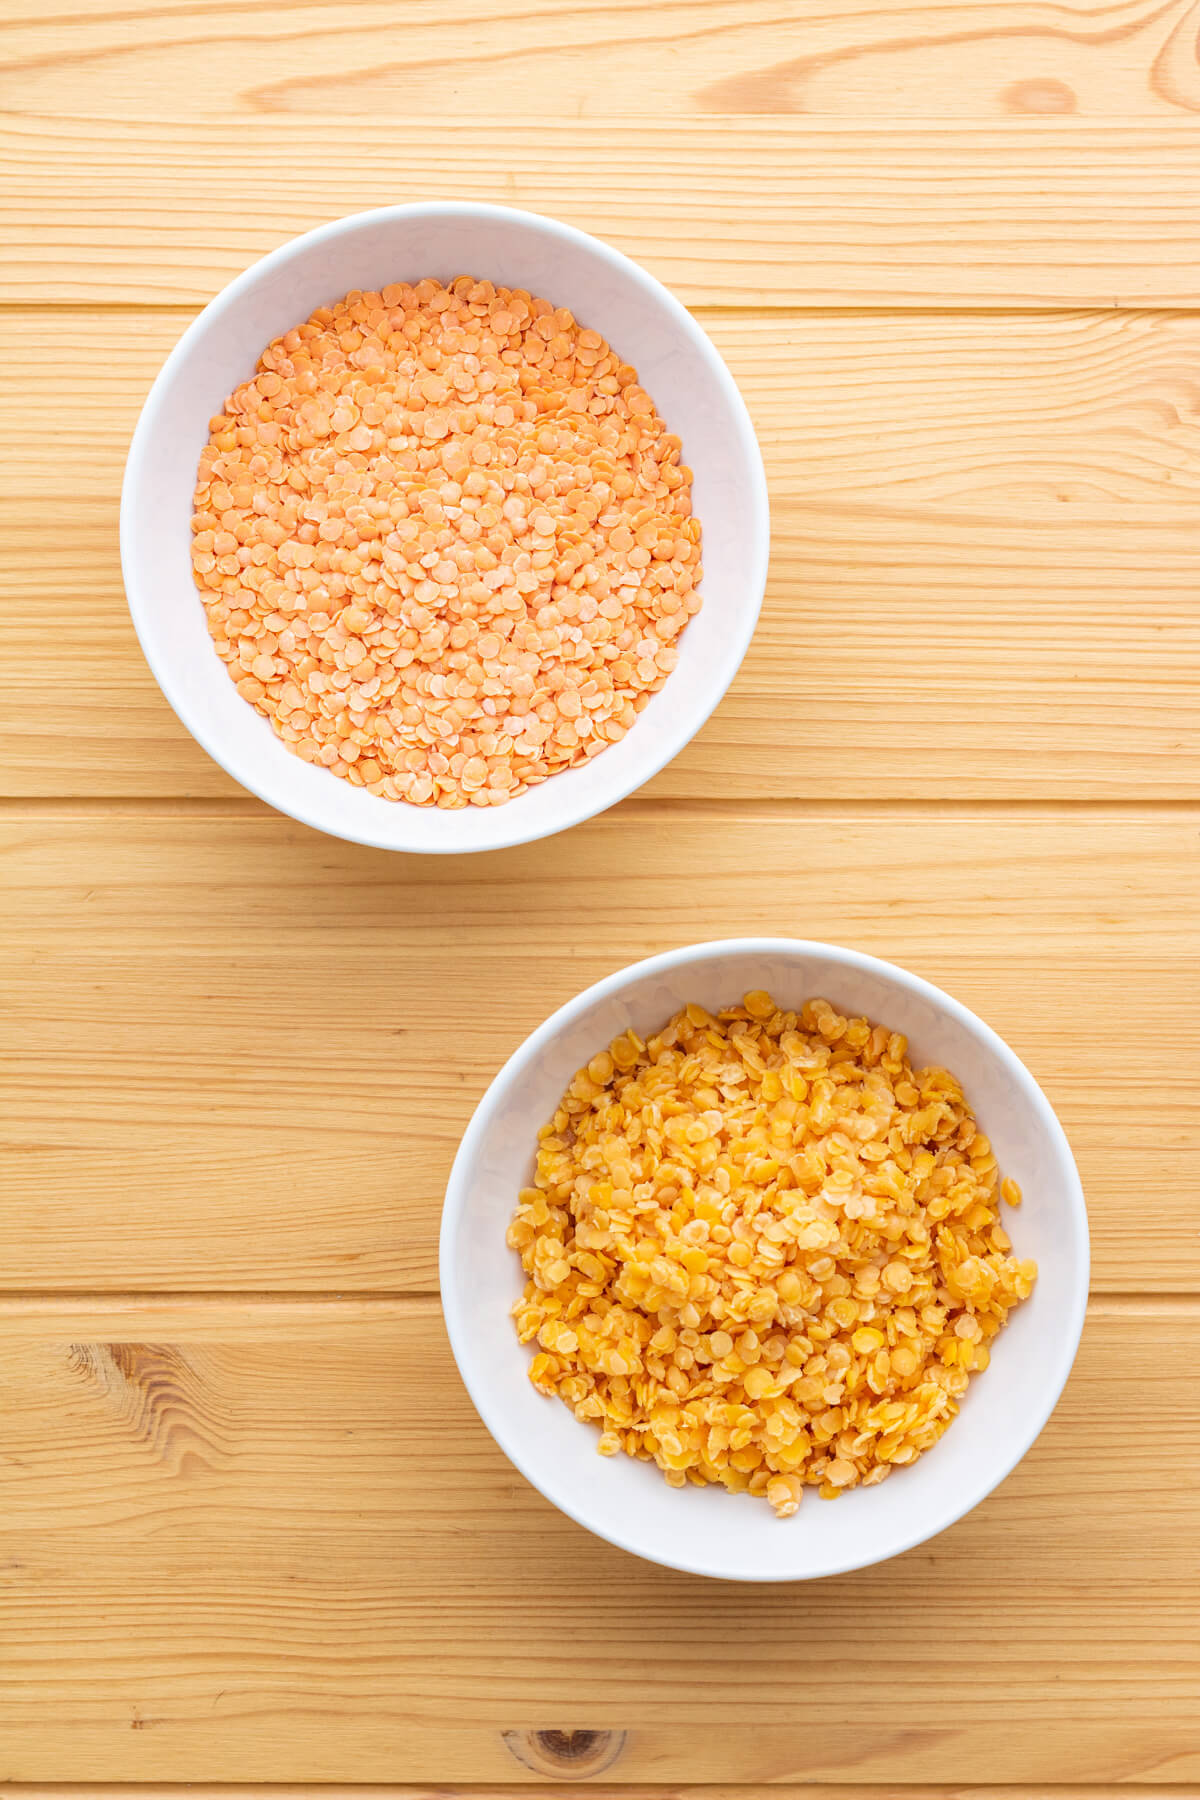 A comparison photo of two bowls of red lentils. One bowl contains raw lentils, the other contains cooked red lentils.